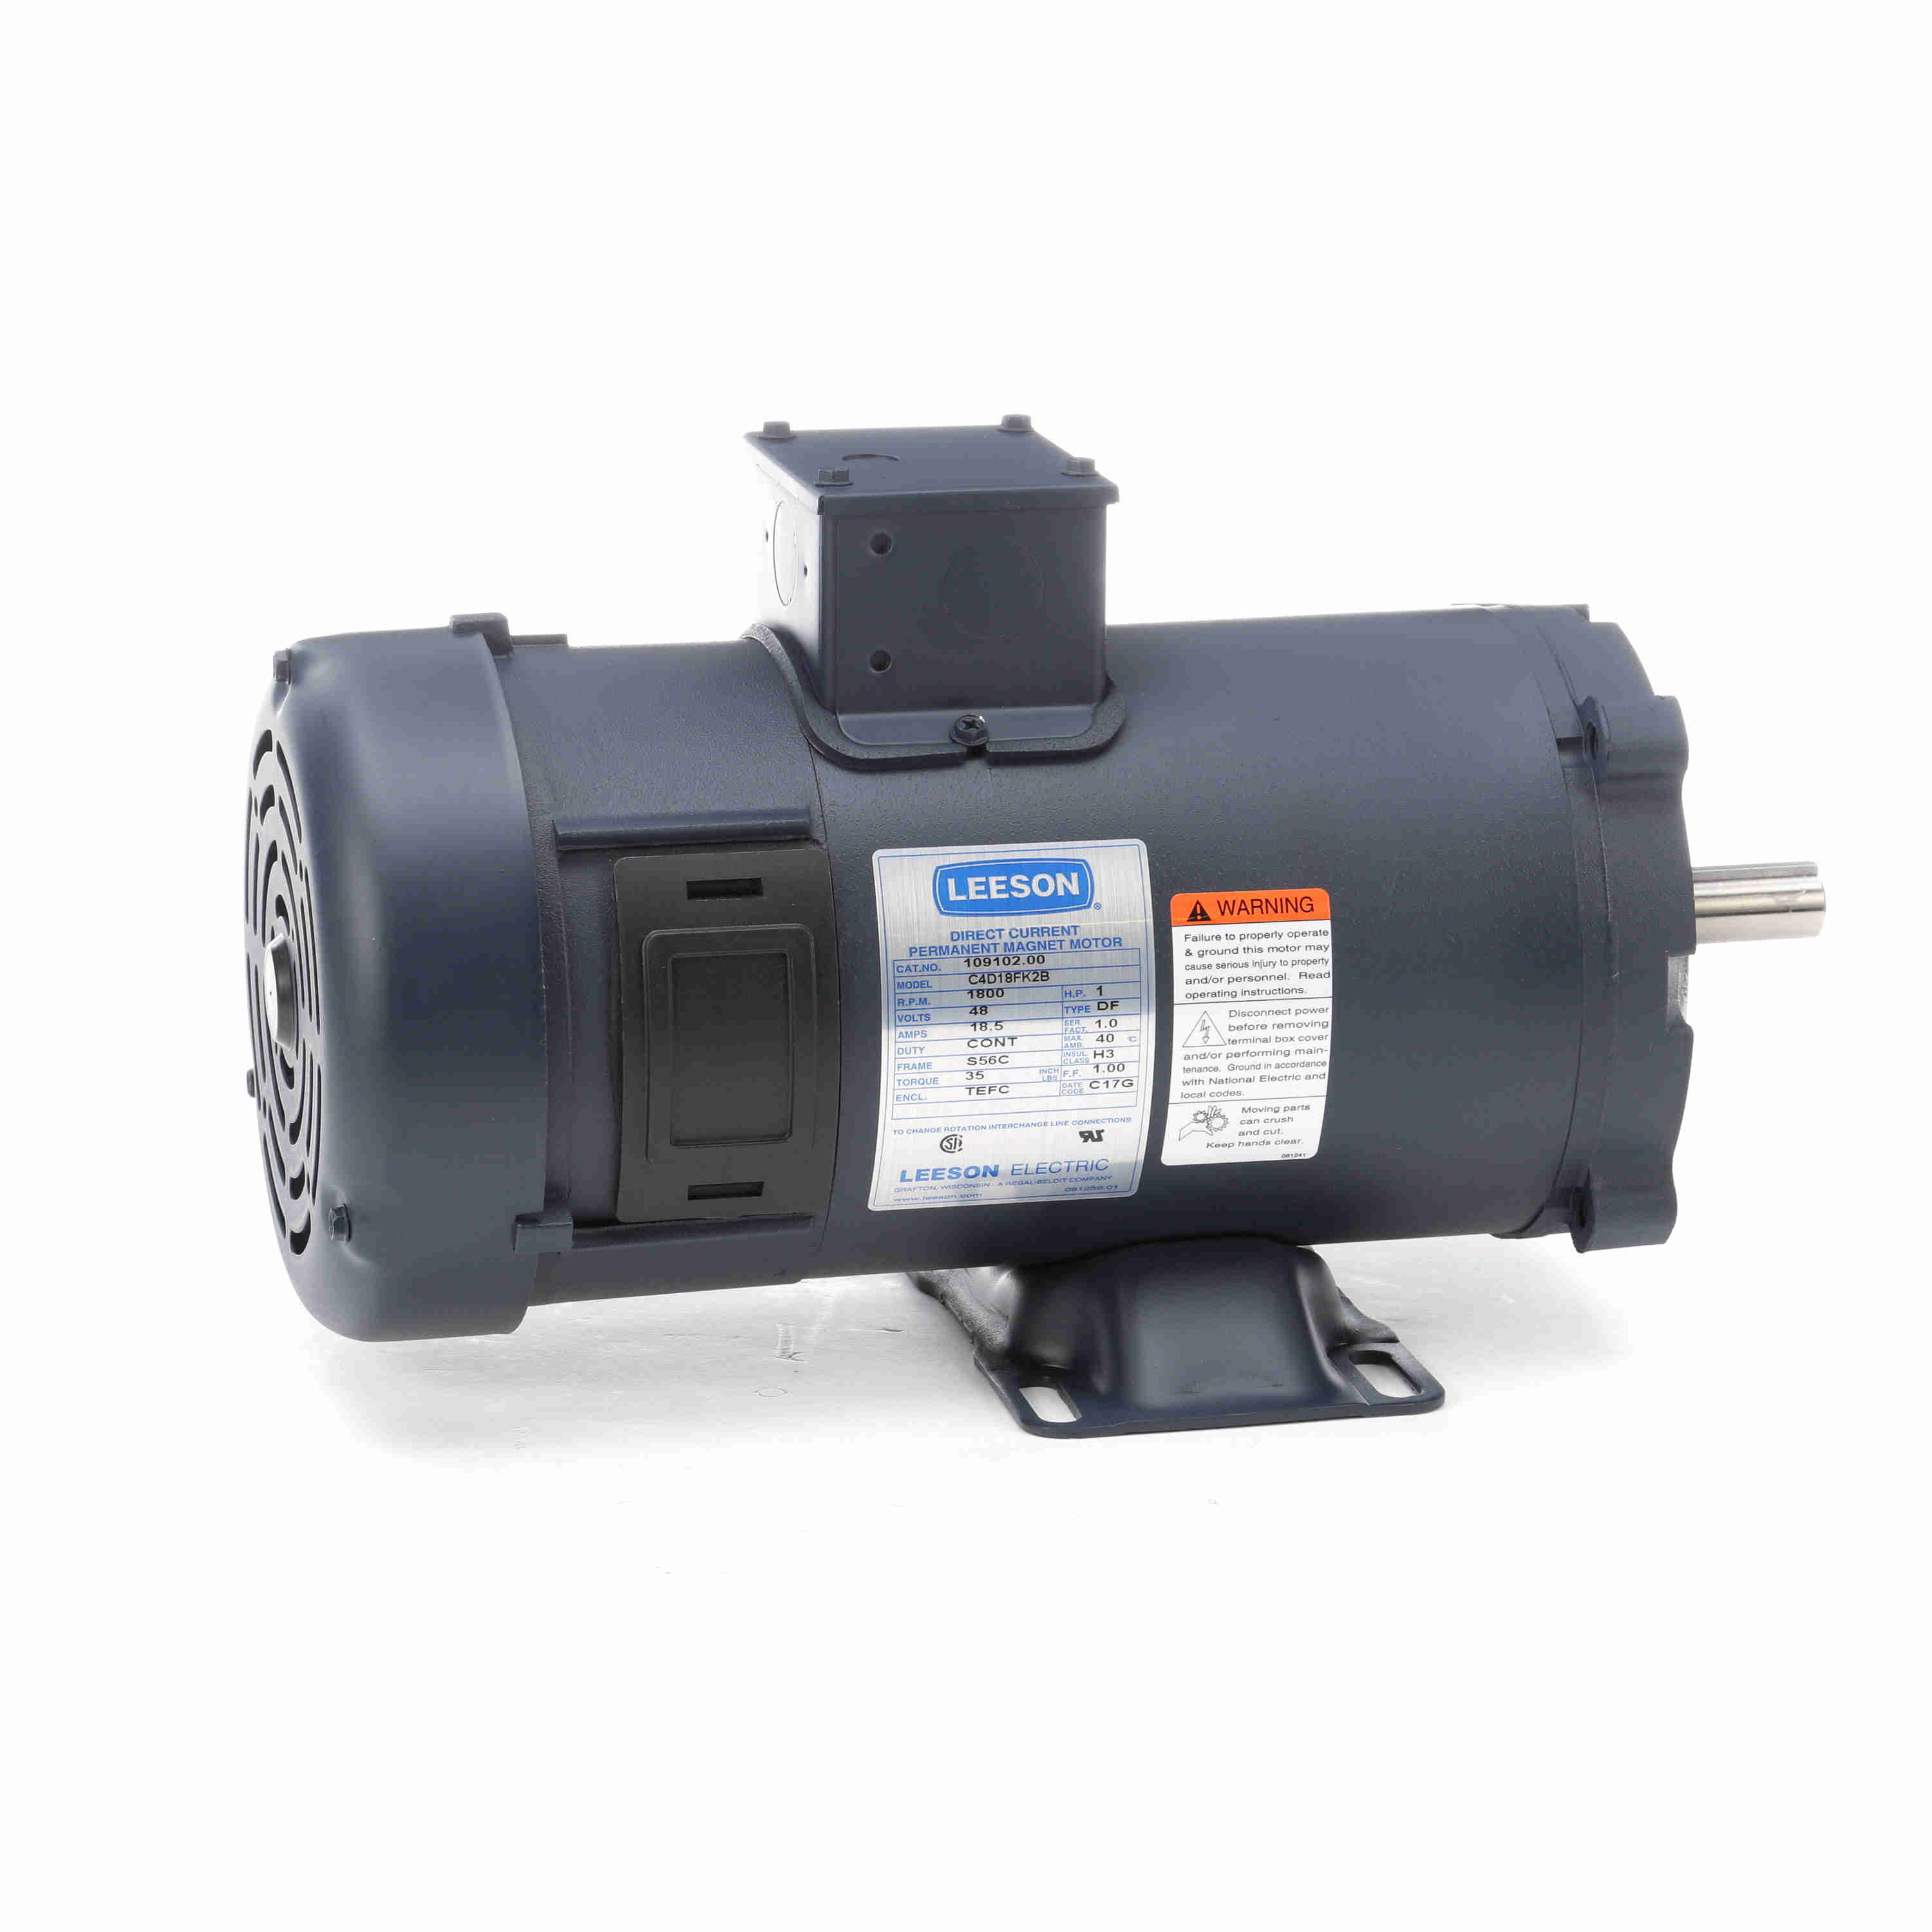 109102.00 Leeson 1HP Low Voltage DC Electric Motor, 1800RPM 4